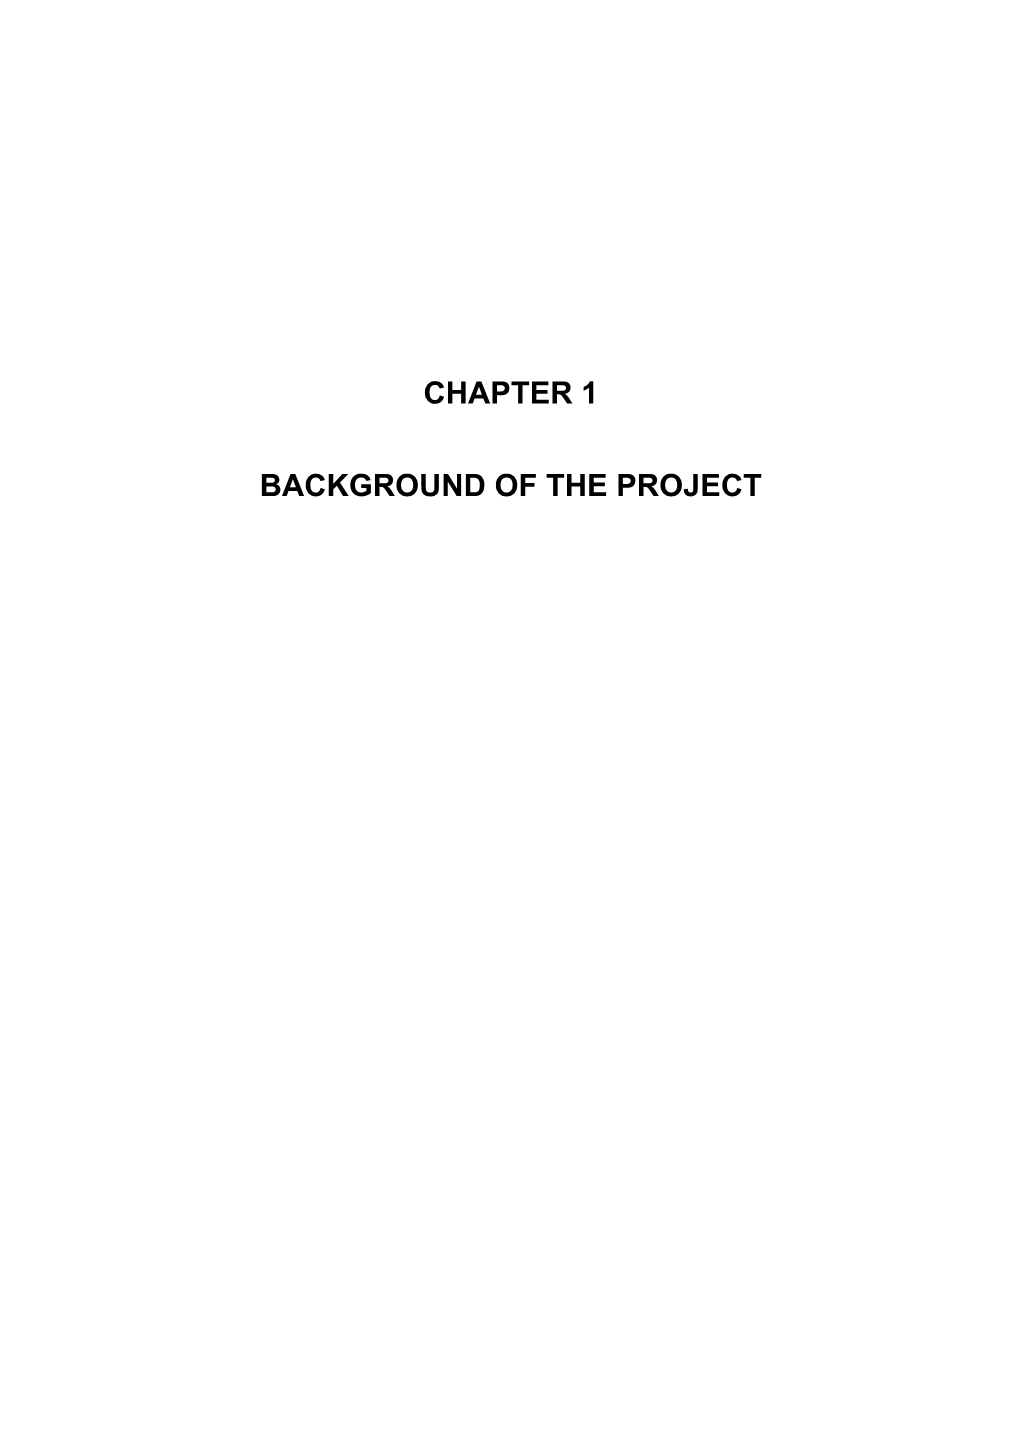 Chapter 1 Background of the Project